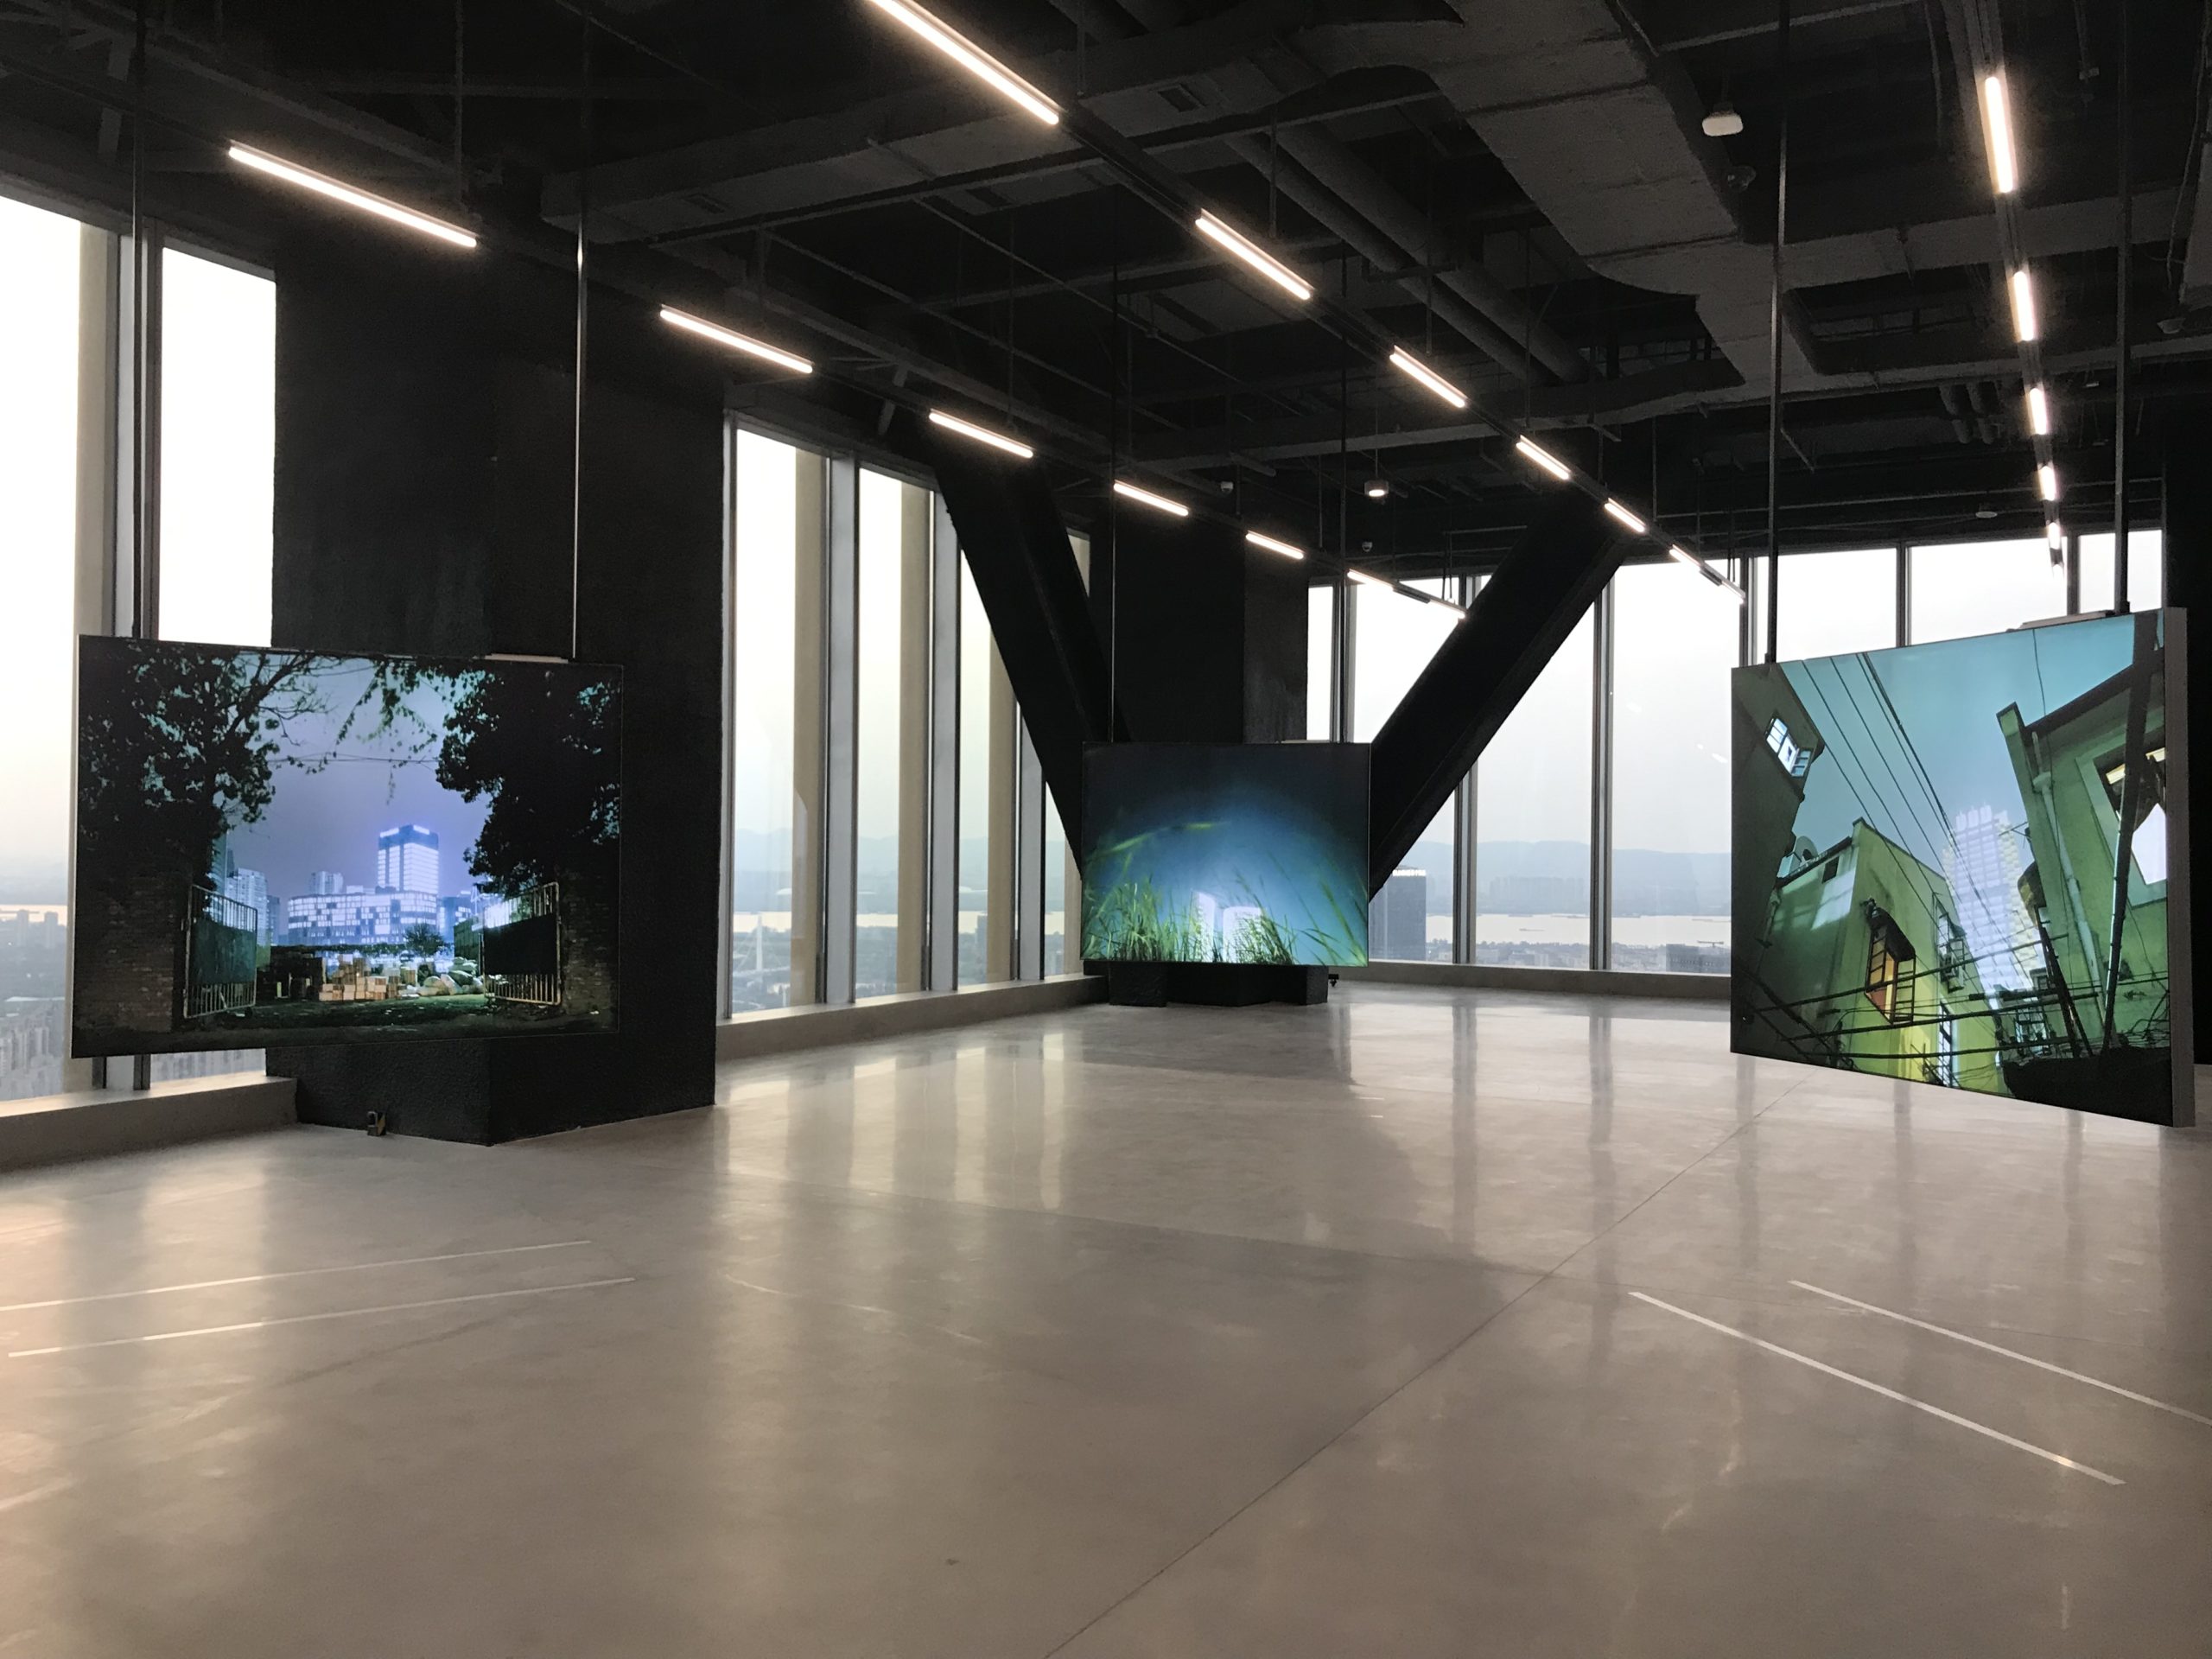 Jiang Pengyi participates in “With/Against the Flow” at G Museum, Nanjing